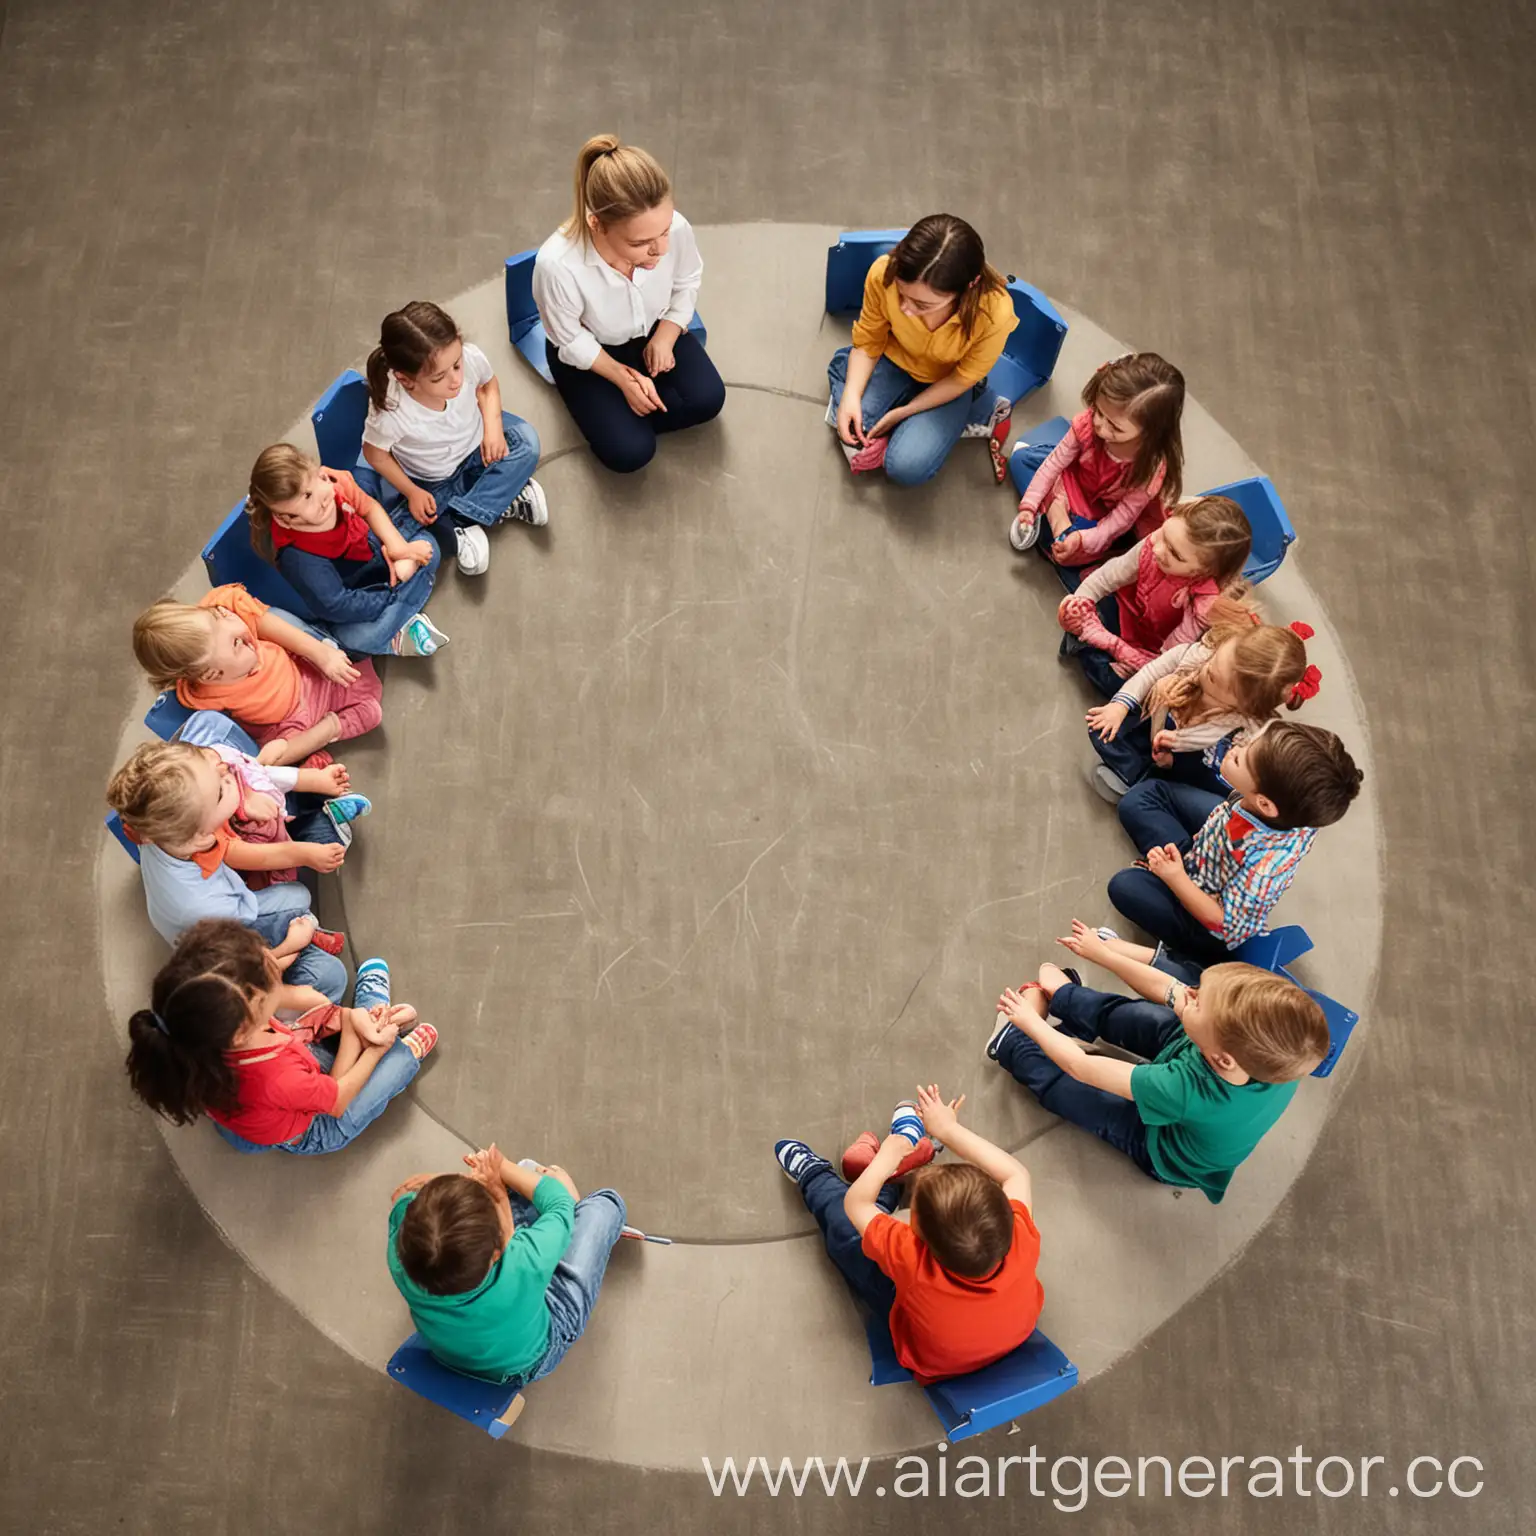 Educator-and-Children-Sitting-in-a-SemiCircle-on-the-Floor